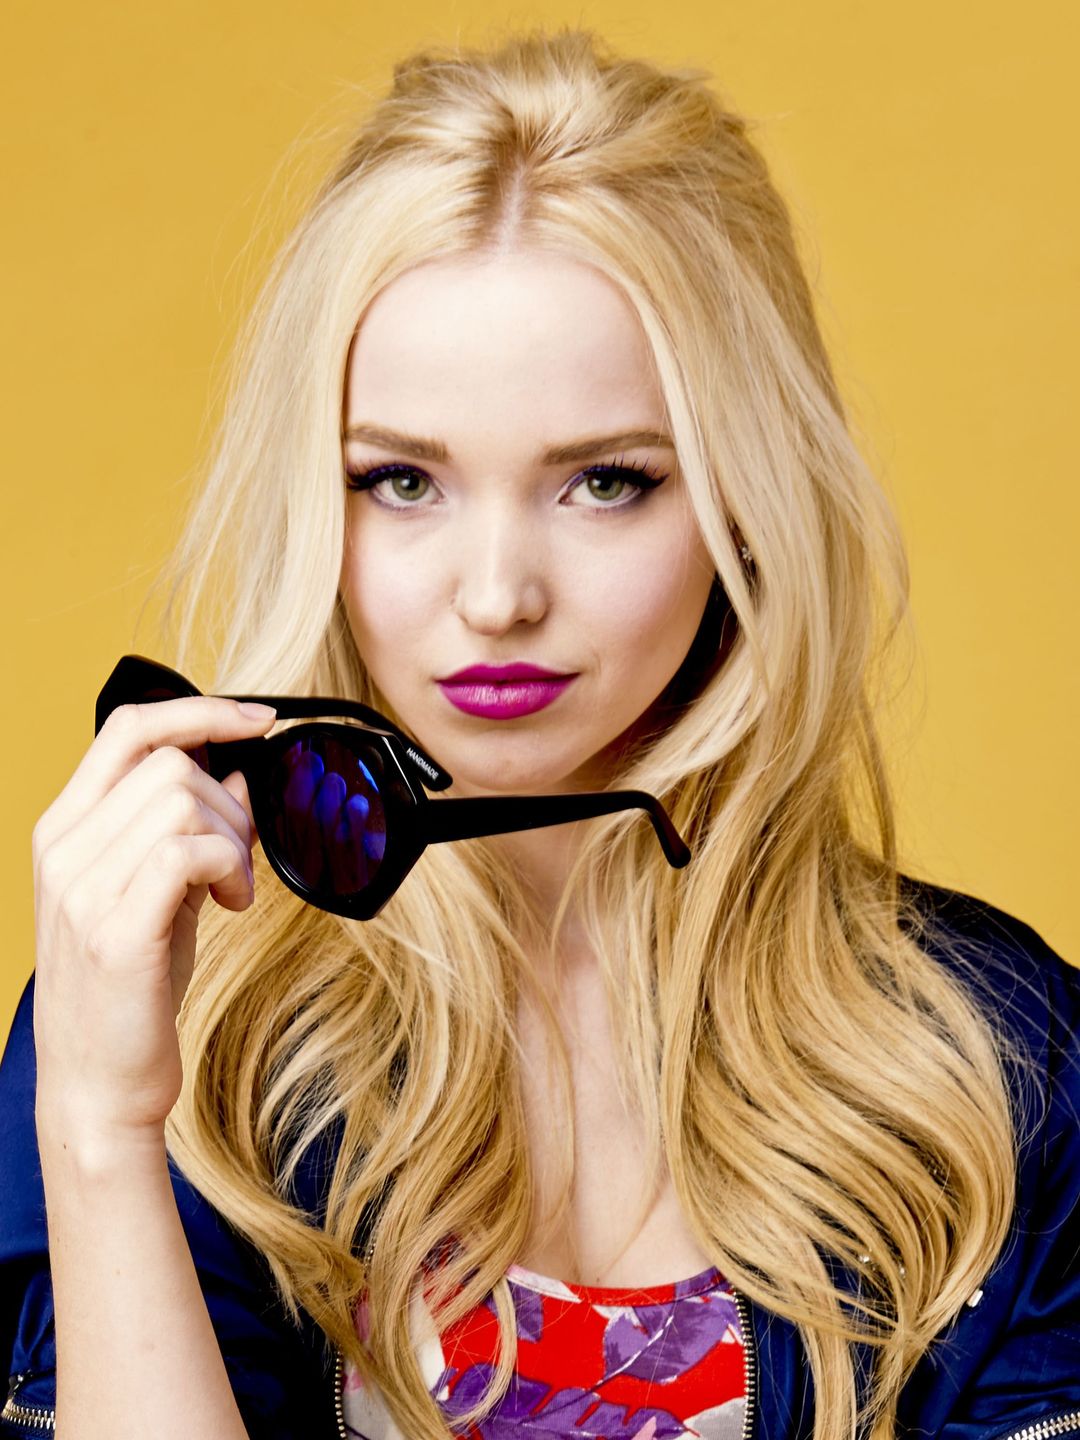 Dove Cameron does she have a husband